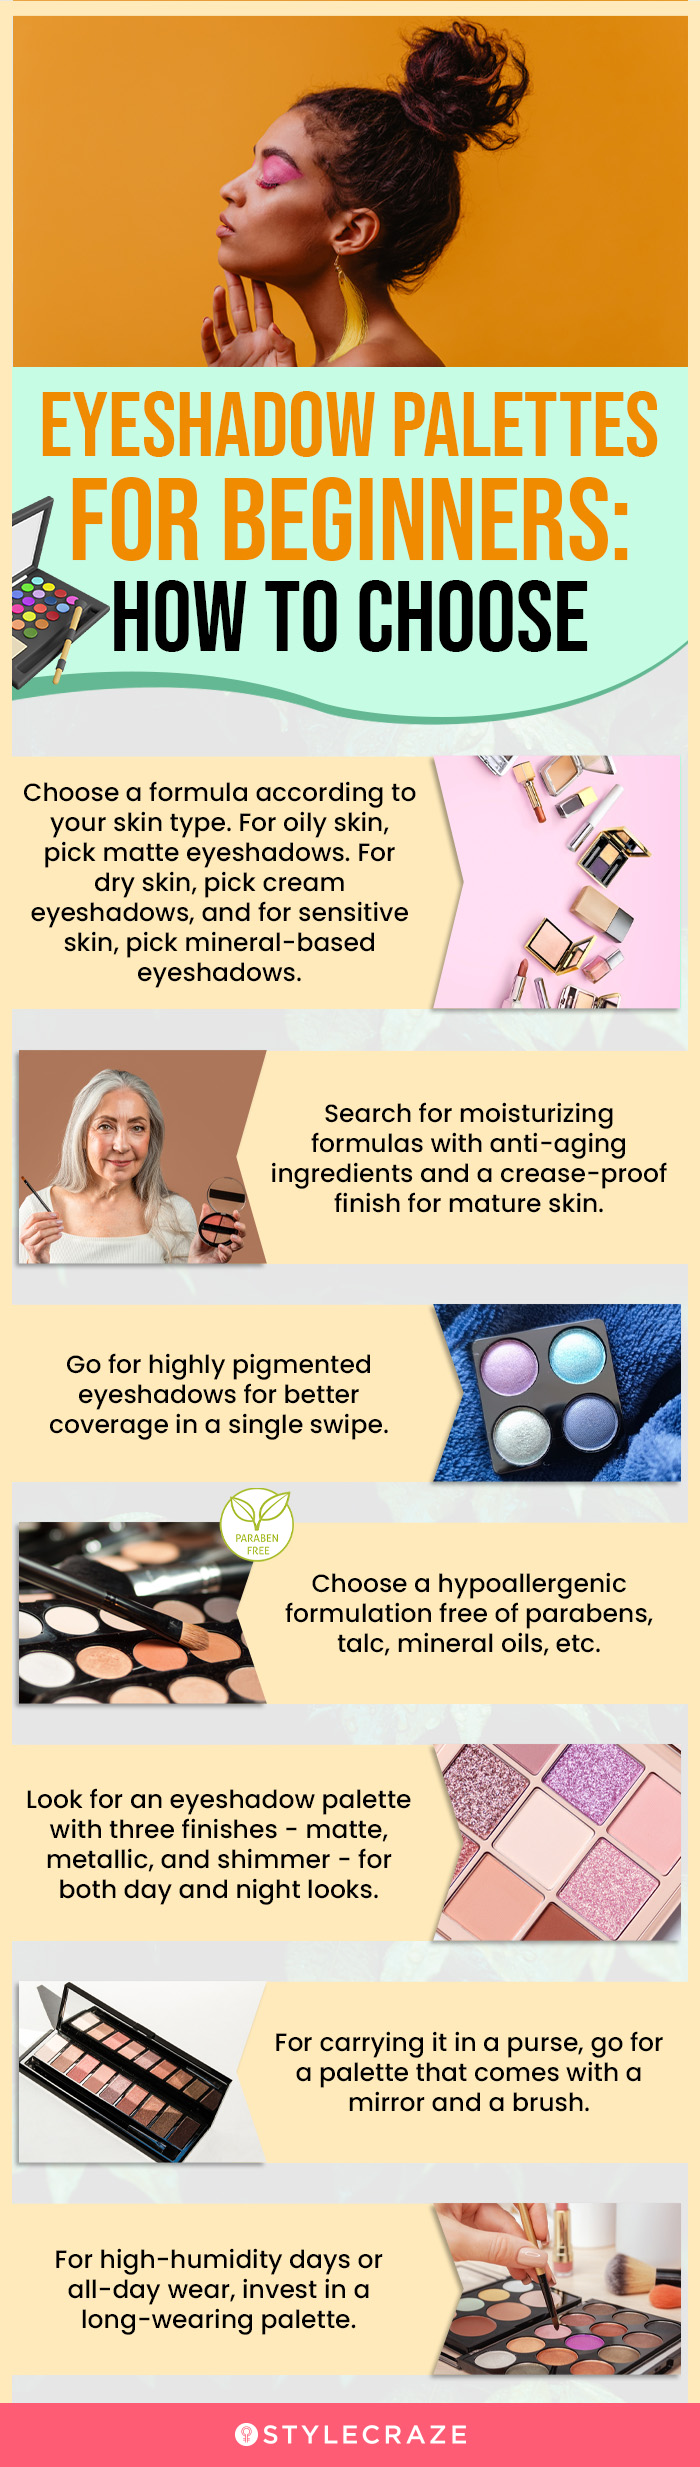 Eyeshadow Palettes For Beginners: How To Choose  [infographic]